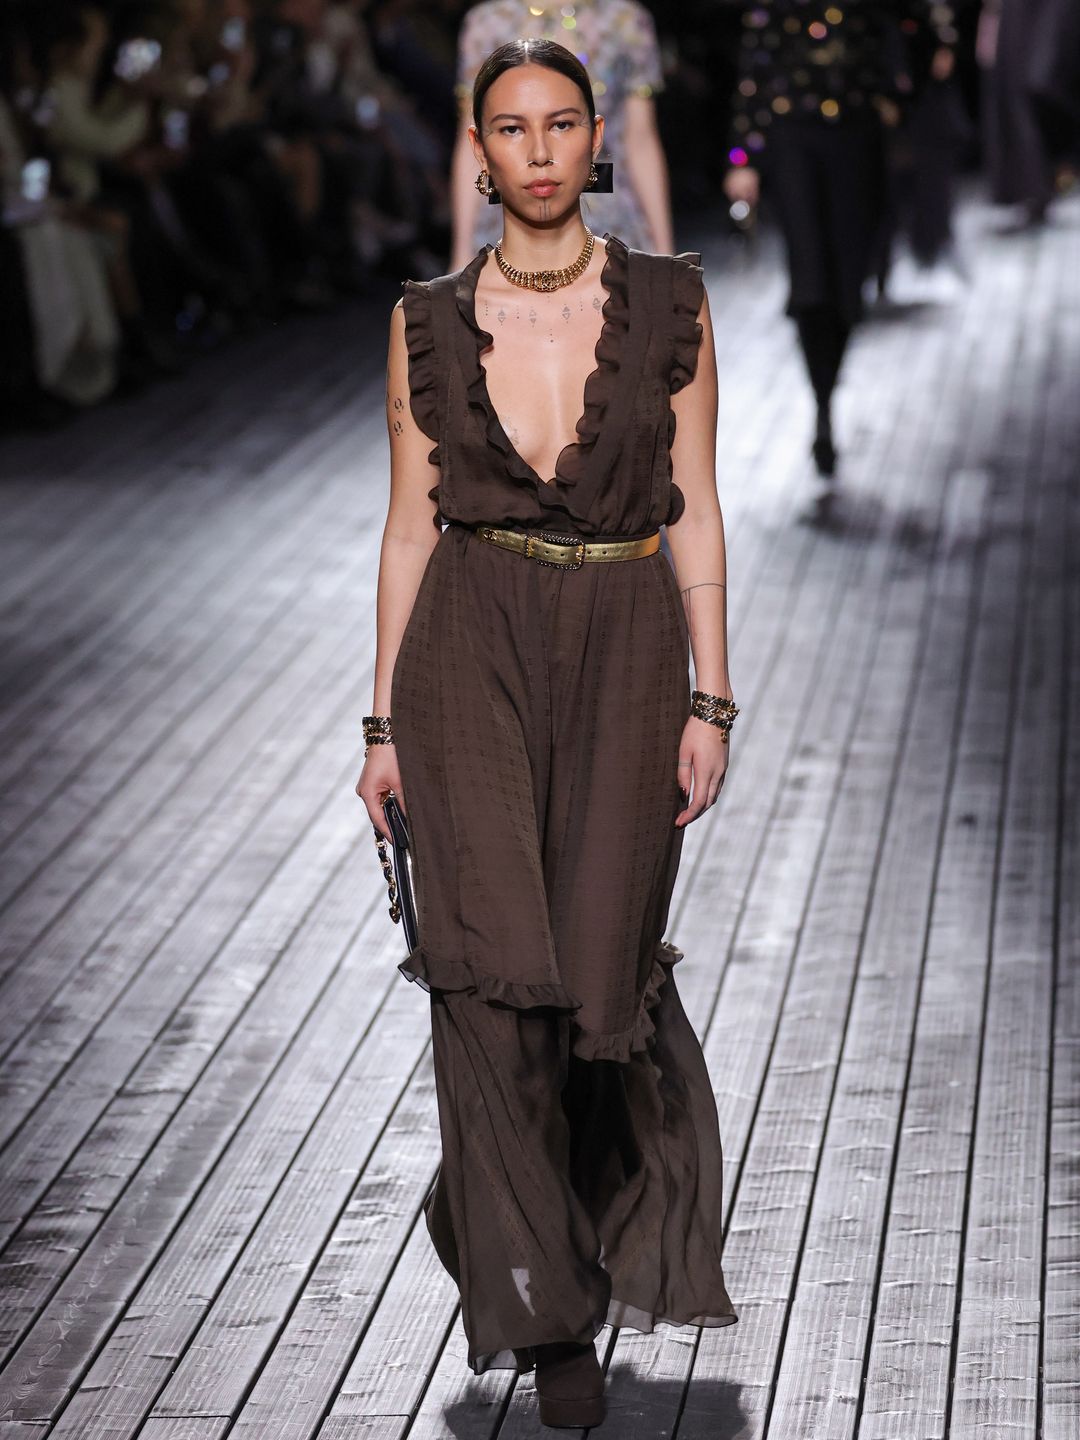 Quannah Chasinghorse walks the runway during the Chanel Womenswear Fall/Winter 2024-2025 show in a plunging neckline brown sheer gown